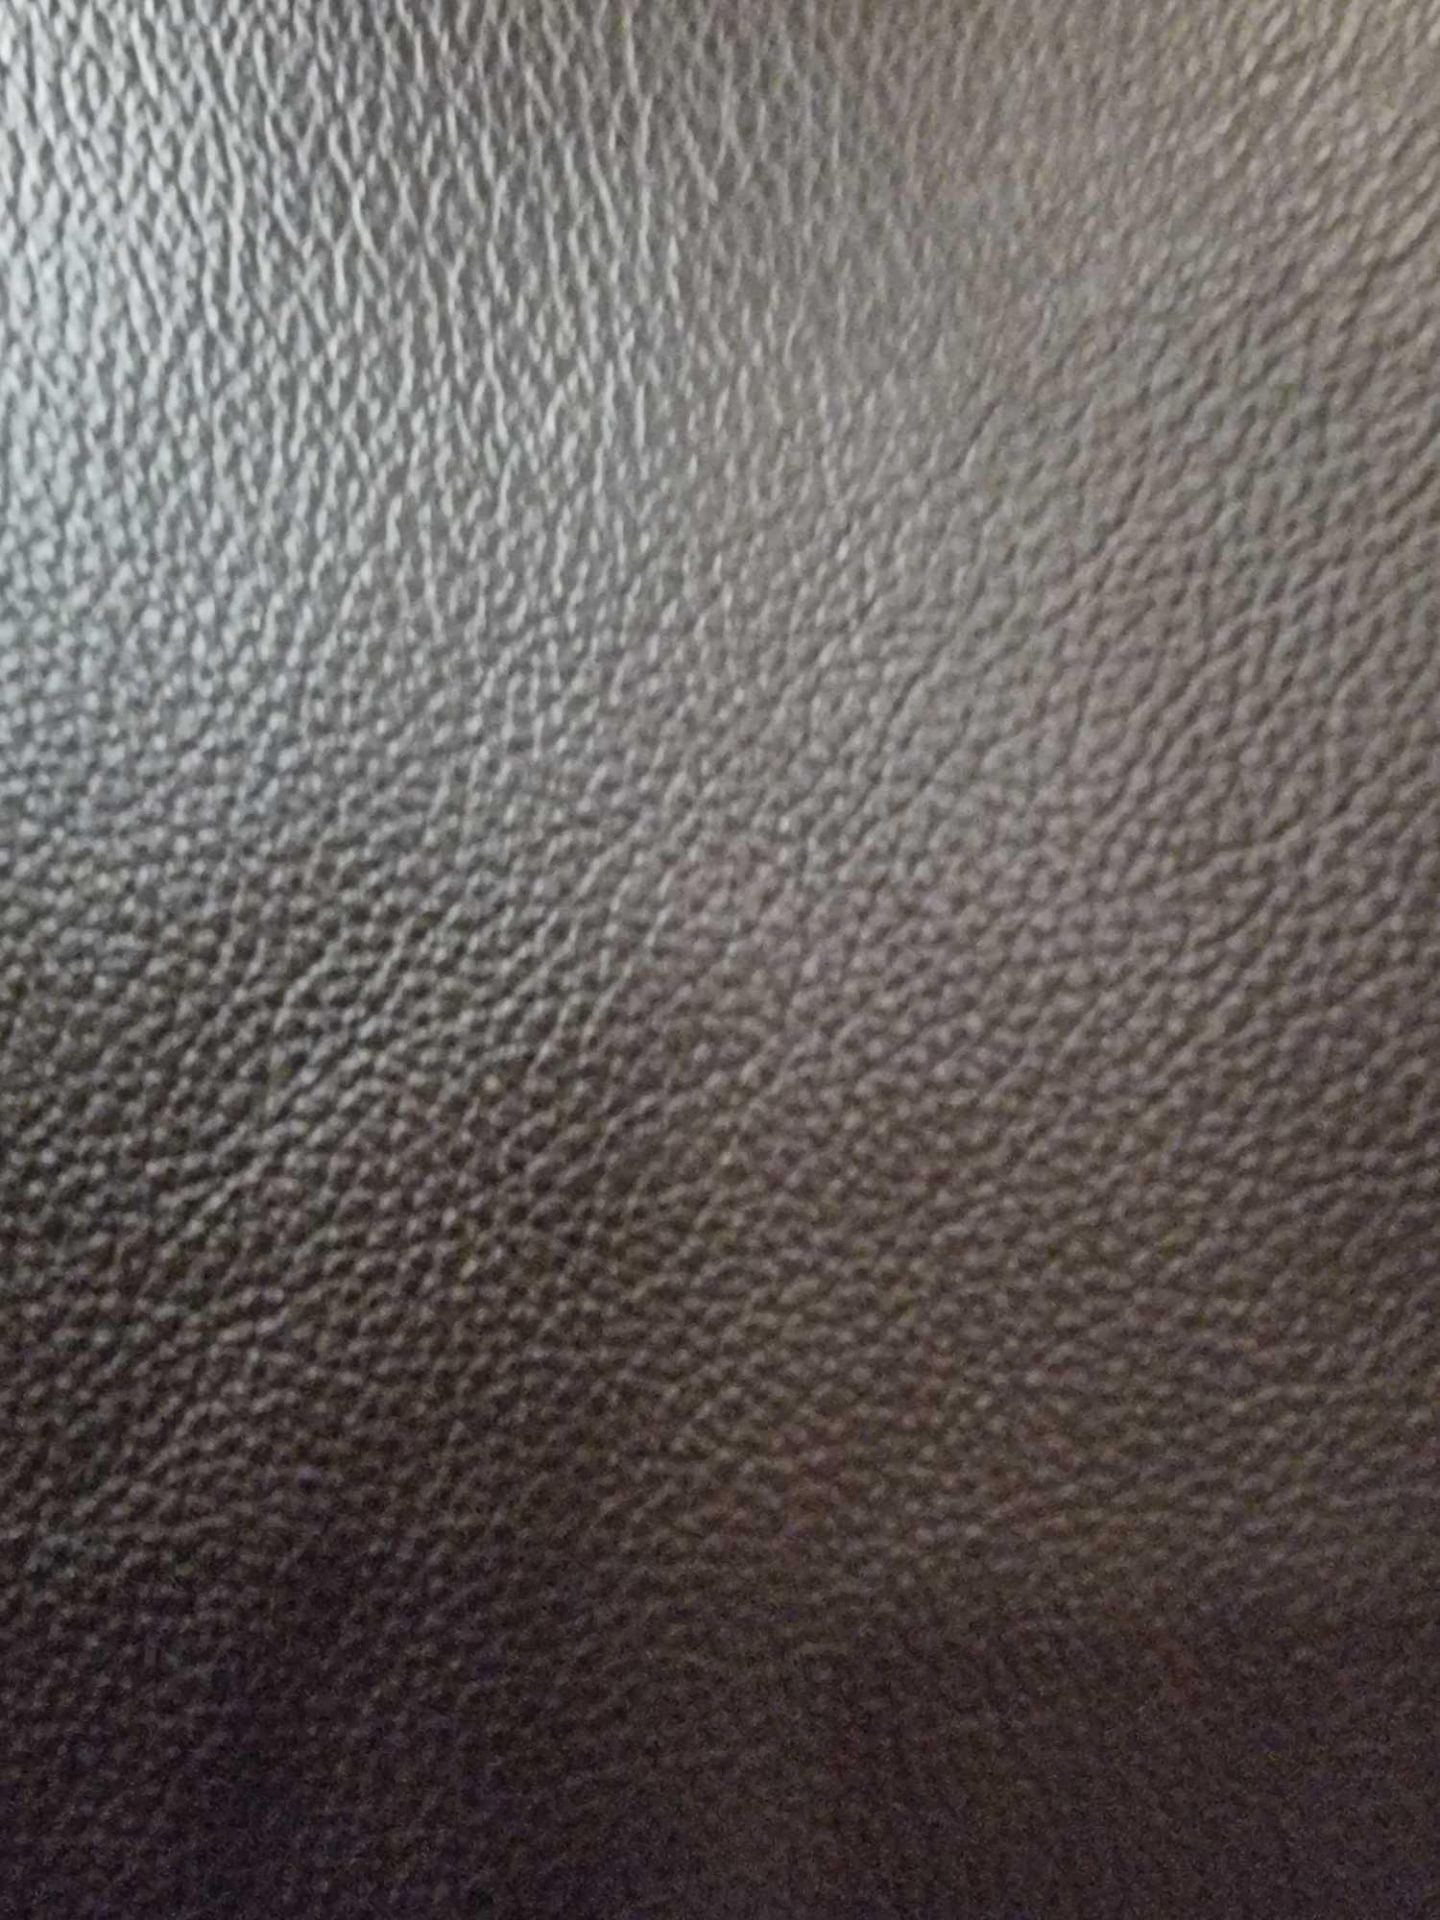 Mastrotto Hudson Chocolate Leather Hide approximately 3 04M2 1 9 x 1 6cm ( Hide No,167) - Image 2 of 2